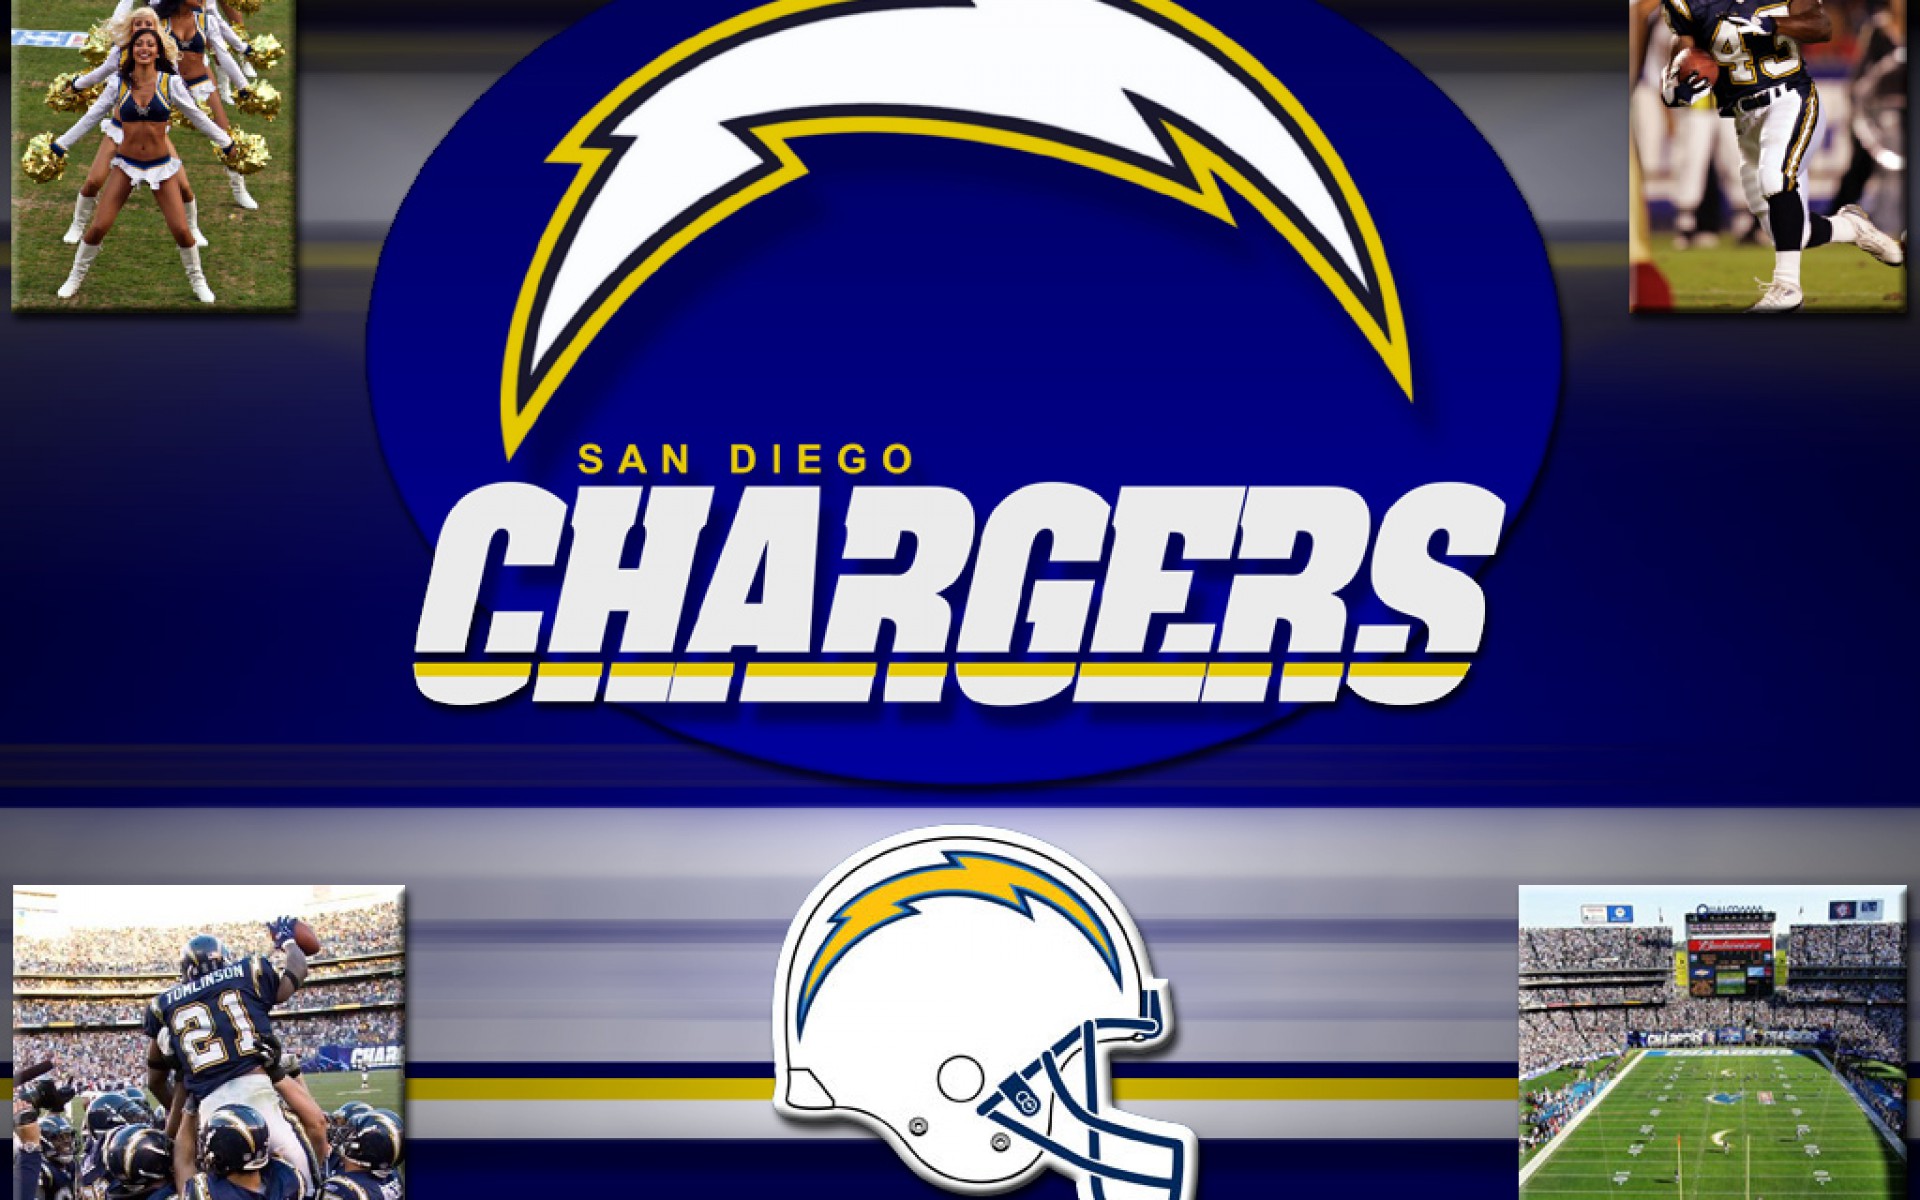 SAN DIEGO CHARGERS nfl football nm wallpaper 1920x1200